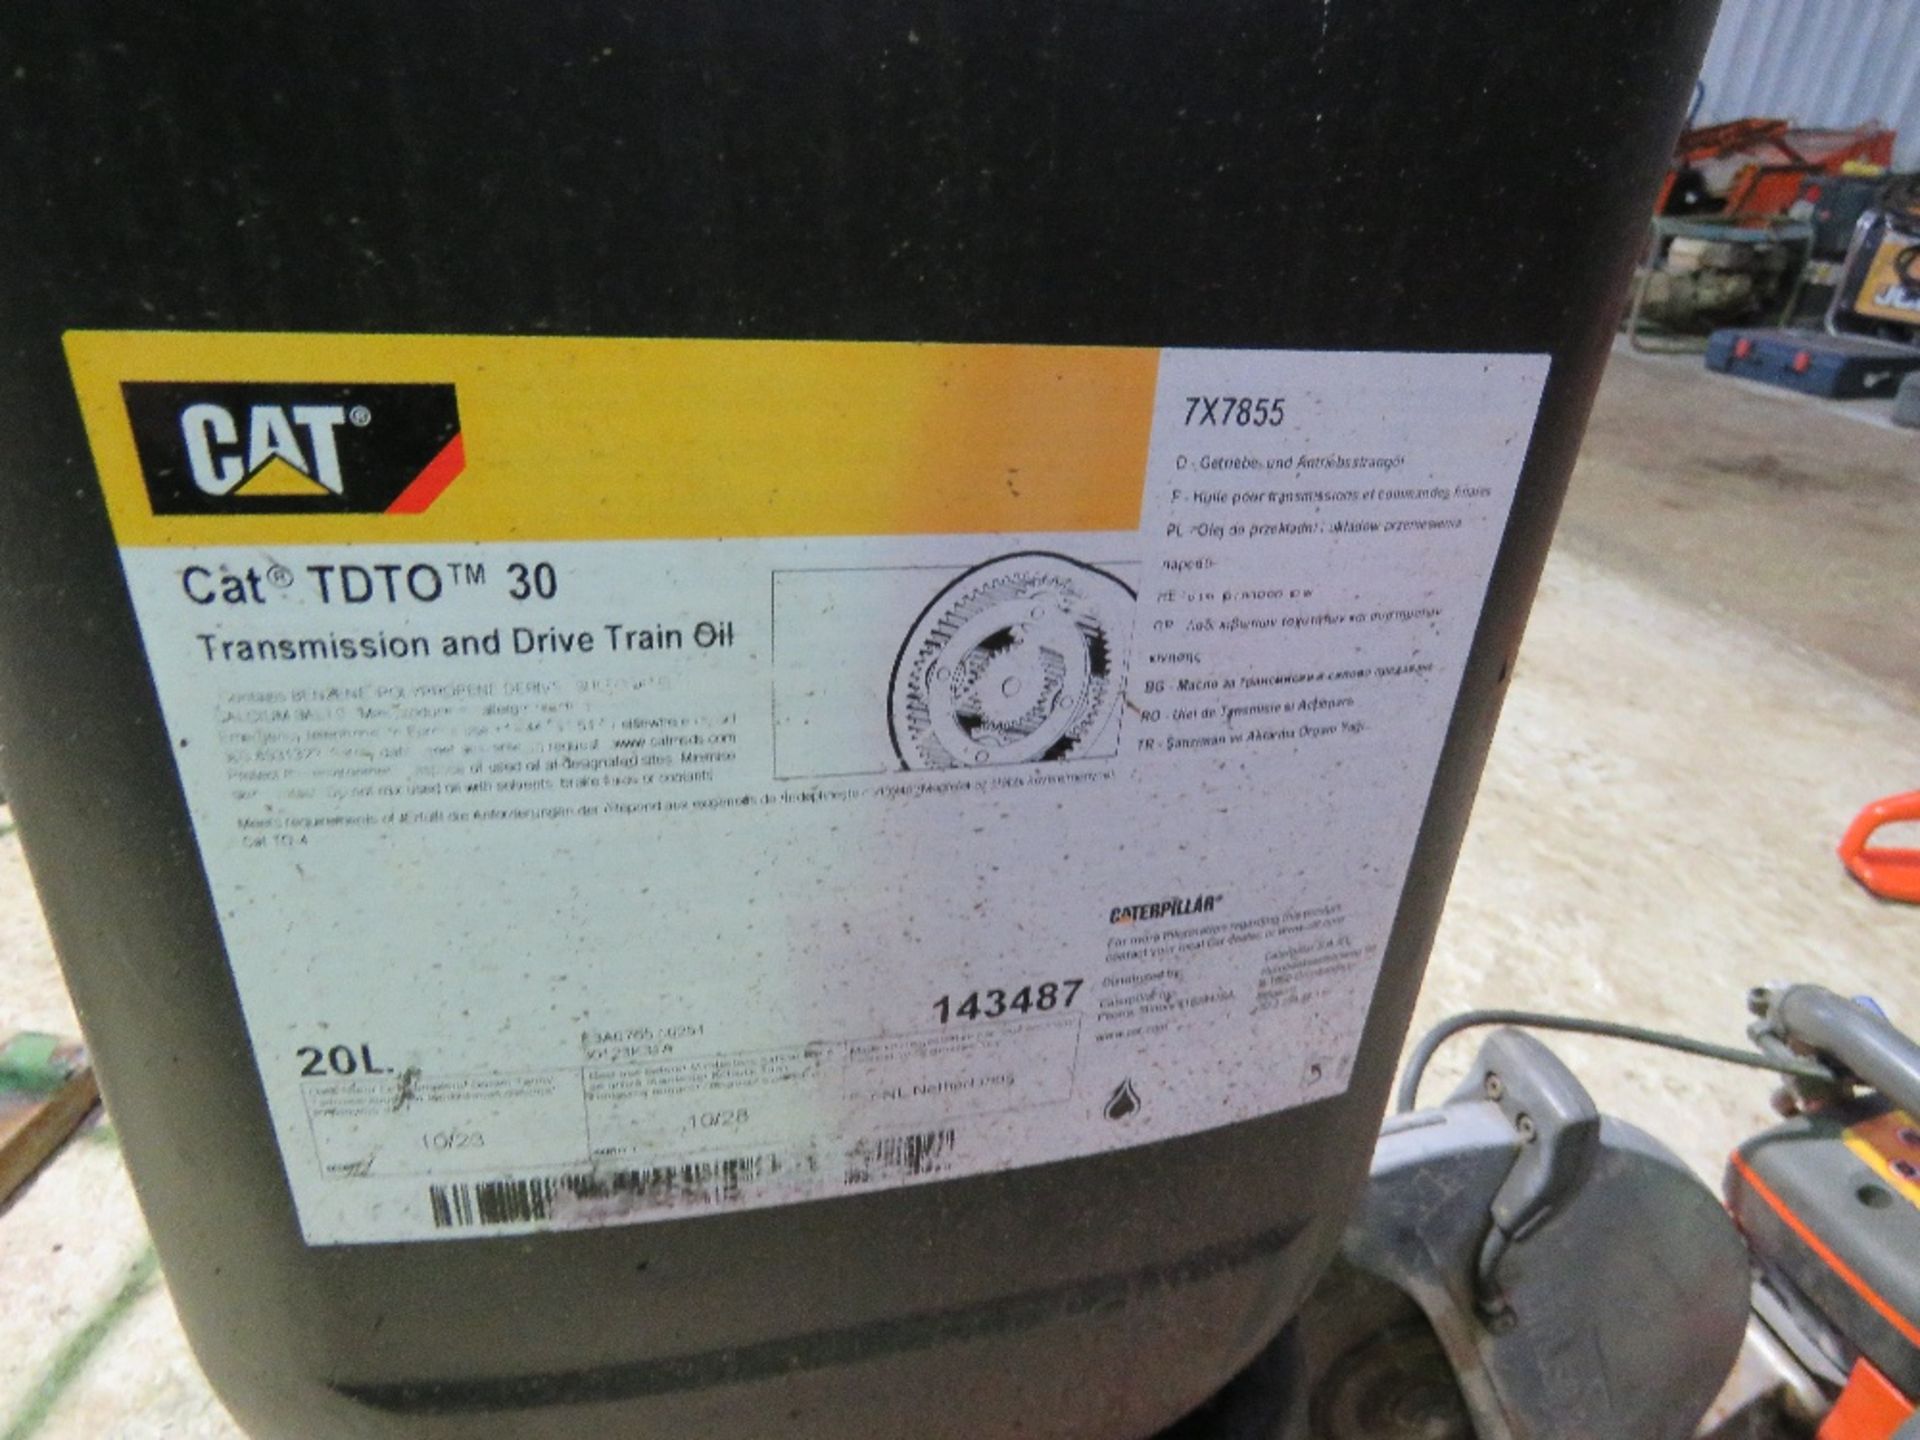 2 X DRUMS OF CATERPILLAR CAT TDTO 30 HYDRAULIC/TRANSMISSION OIL. - Image 2 of 3